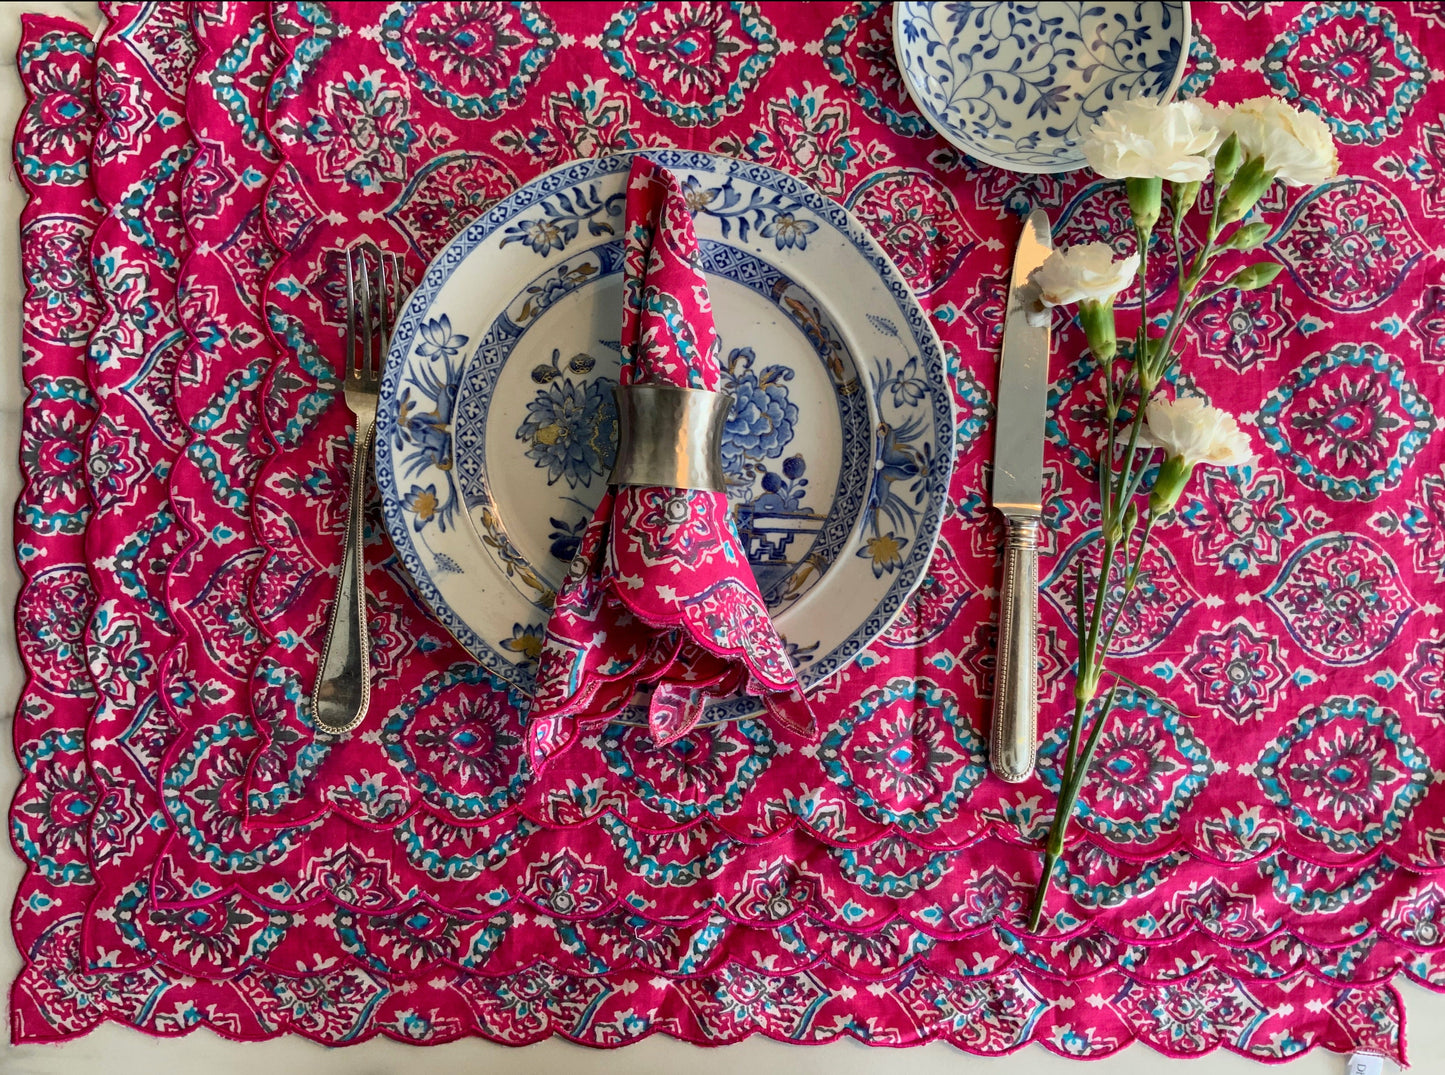 Pink Block-print Lunch Napkins with Scalloped Edges - DharBazaar